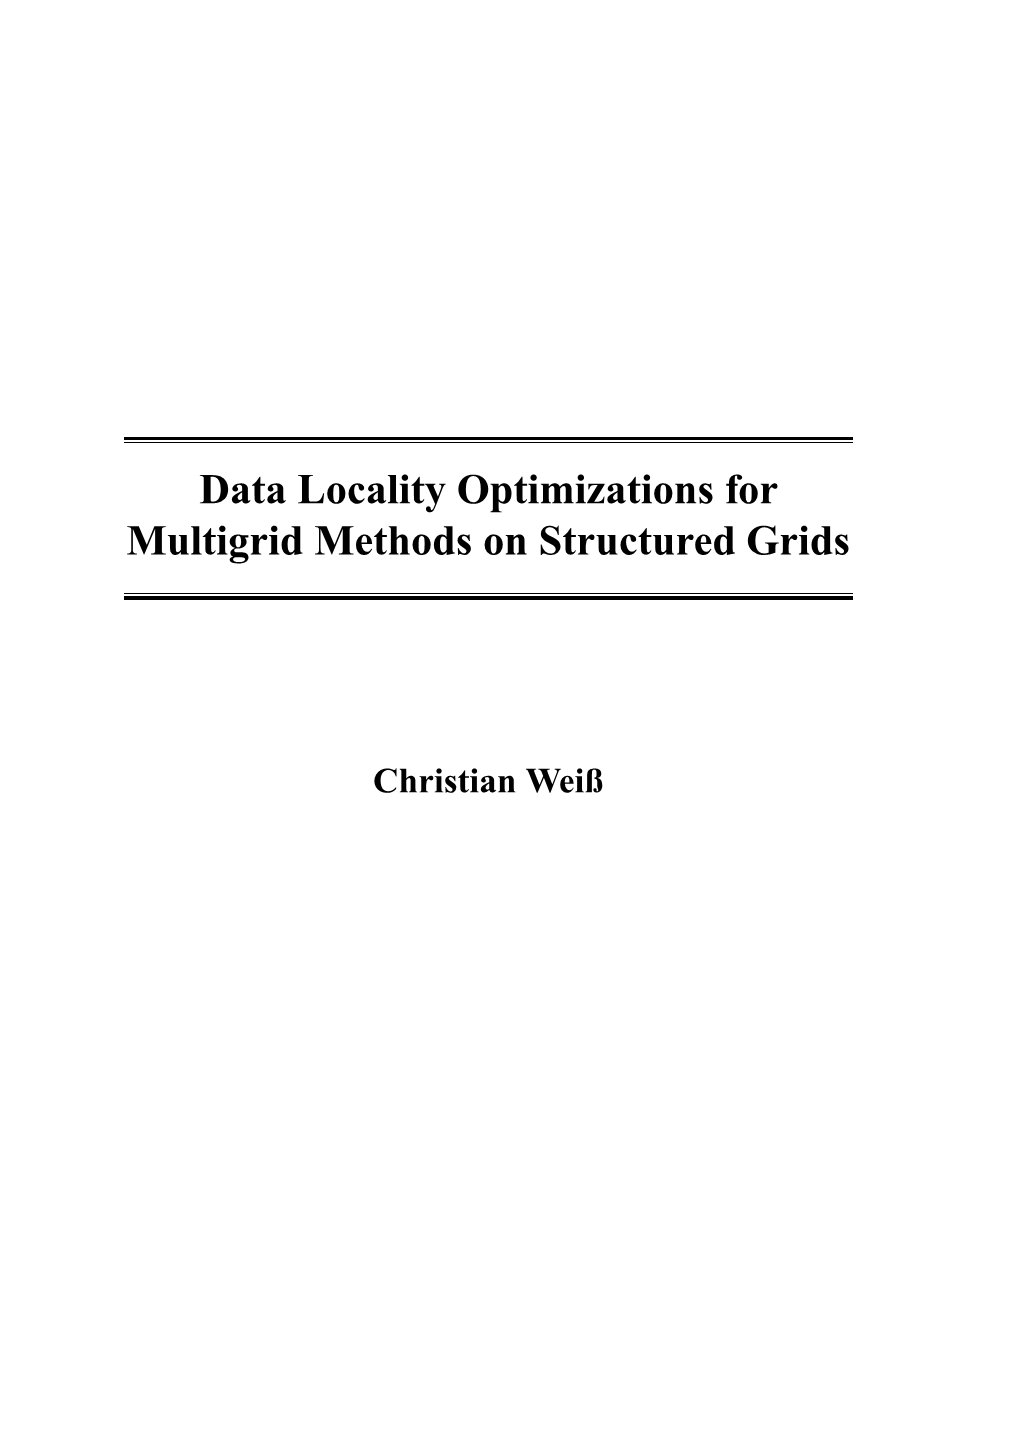 Data Locality Optimizations for Multigrid Methods on Structured Grids